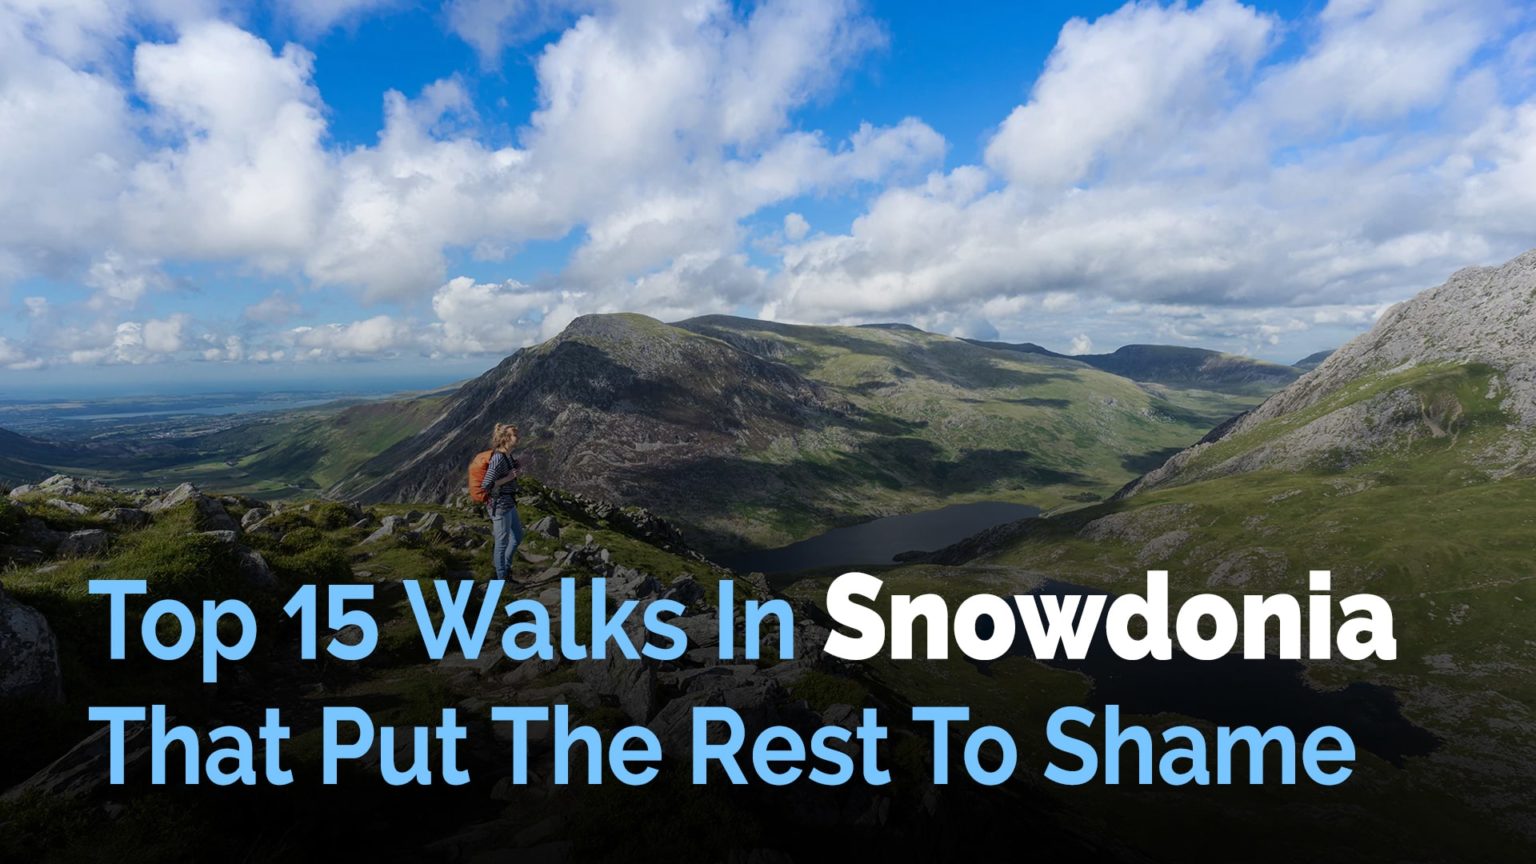 Top 15 Walks In Snowdonia That Put The Rest To Shame